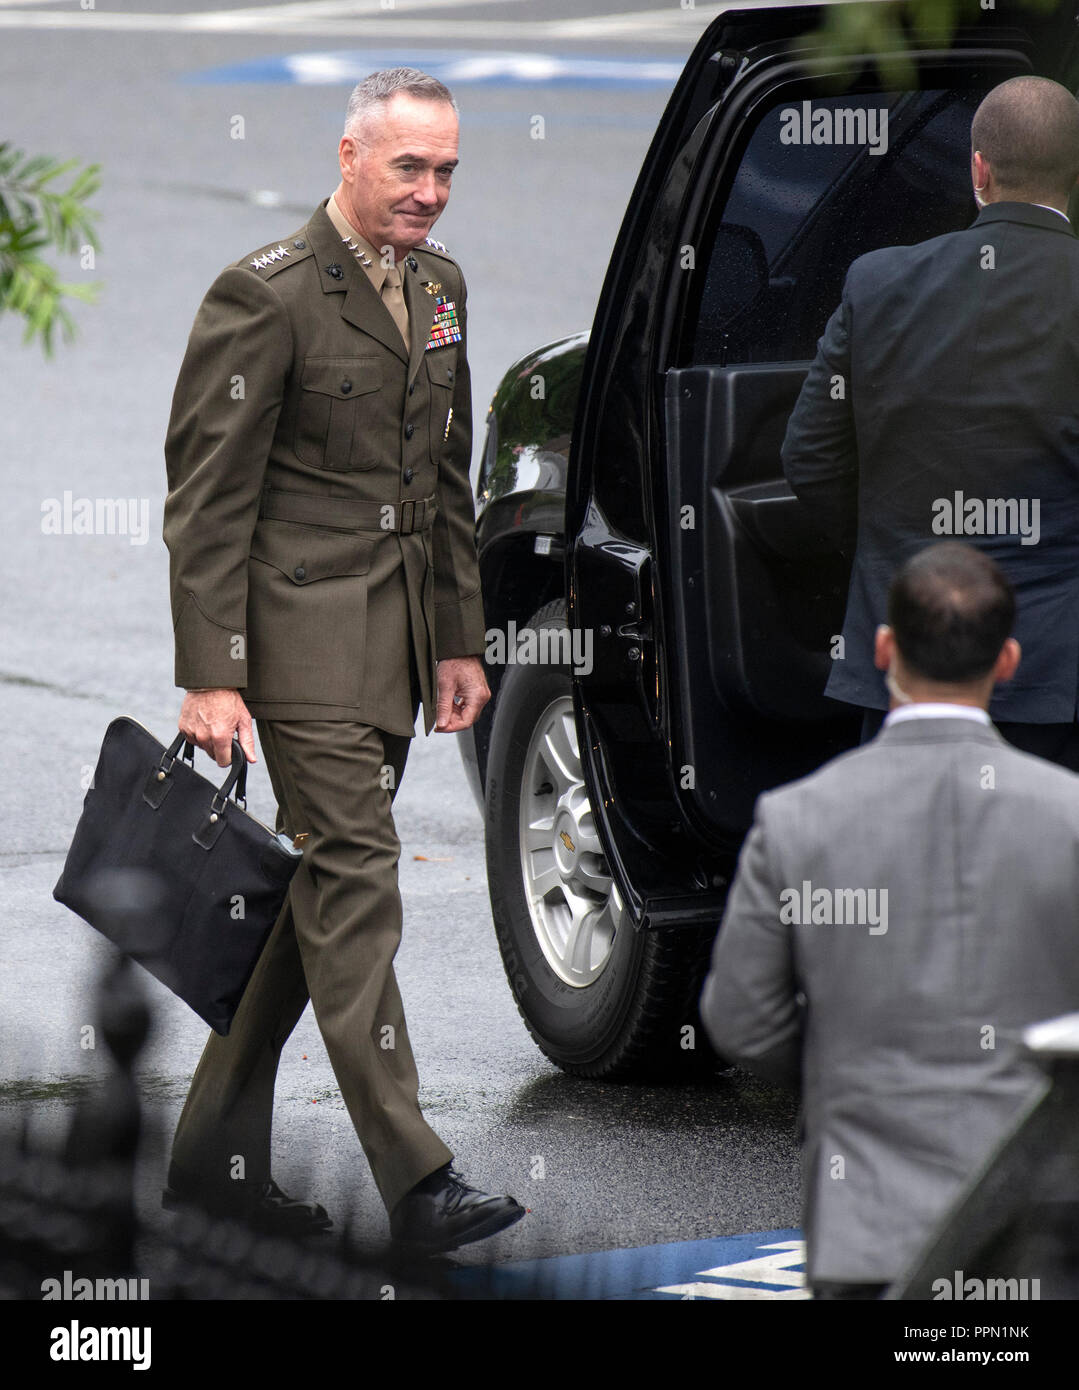 United States Marine Corps General General Joseph F. Dunford, Jr., Chairman of the Joint Chiefs of Staff, departs a meeting at the White House in Washington, DC that included US Deputy Attorney General Rod Rosenstein on Monday, September 24, 2018. Credit: Ron Sachs/CNP (RESTRICTION: NO New York or New Jersey Newspapers or newspapers within a 75 mile radius of New York City) | usage worldwide Stock Photo